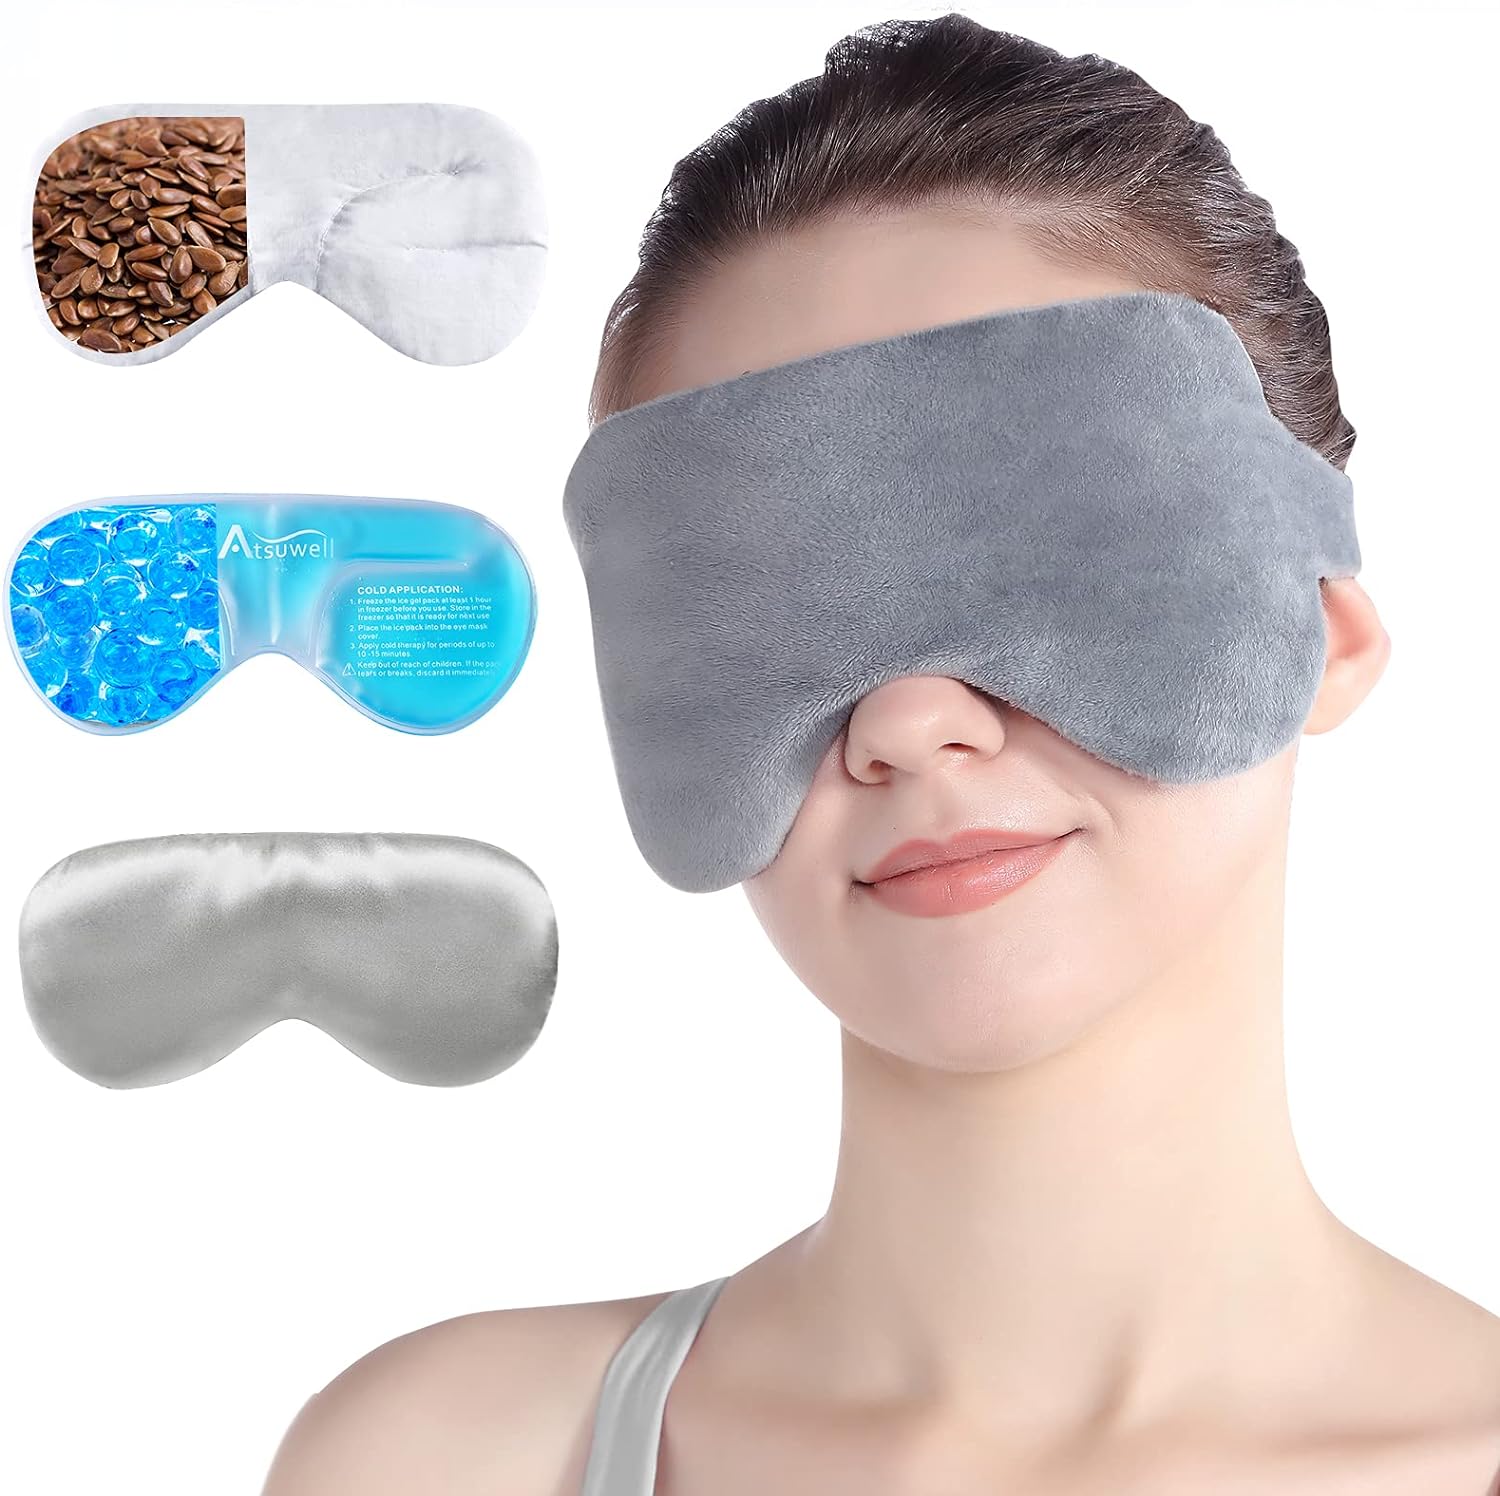 I'd like the mask fabric it is very soft and I like that you have three pieces. You get the outer cover with the head strap, you get the flax seed eye mask and you get the cold mask. I used it right away and warmed up the flaxseed mask for 15 seconds in my microwave. It was very comfortable and warm but not hot. I would not warm it for 30 seconds. I think that would be too hot for your eyes. I liked the eye mask that comes with this it is like a silk fabric very soft and very comfortable. I wish